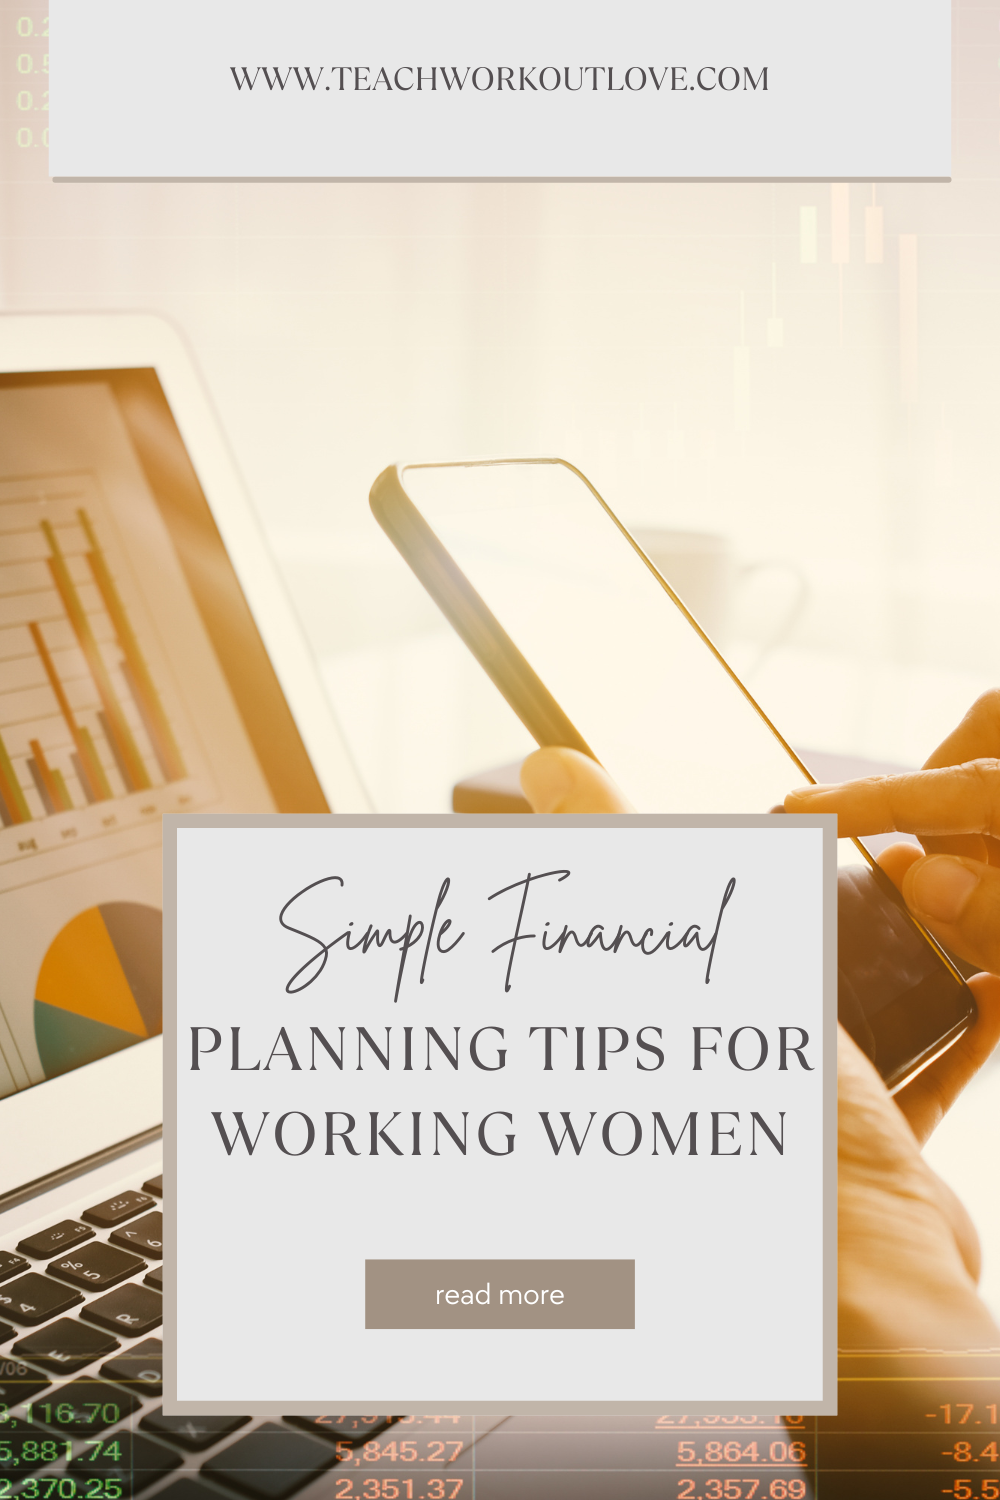 If you're looking for better tips on managing your money in order to hit your short-term and long-term goals, this guide is for you. Whether saving for a new car, starting a business, or even sending your kids to college, you need to know where to start.